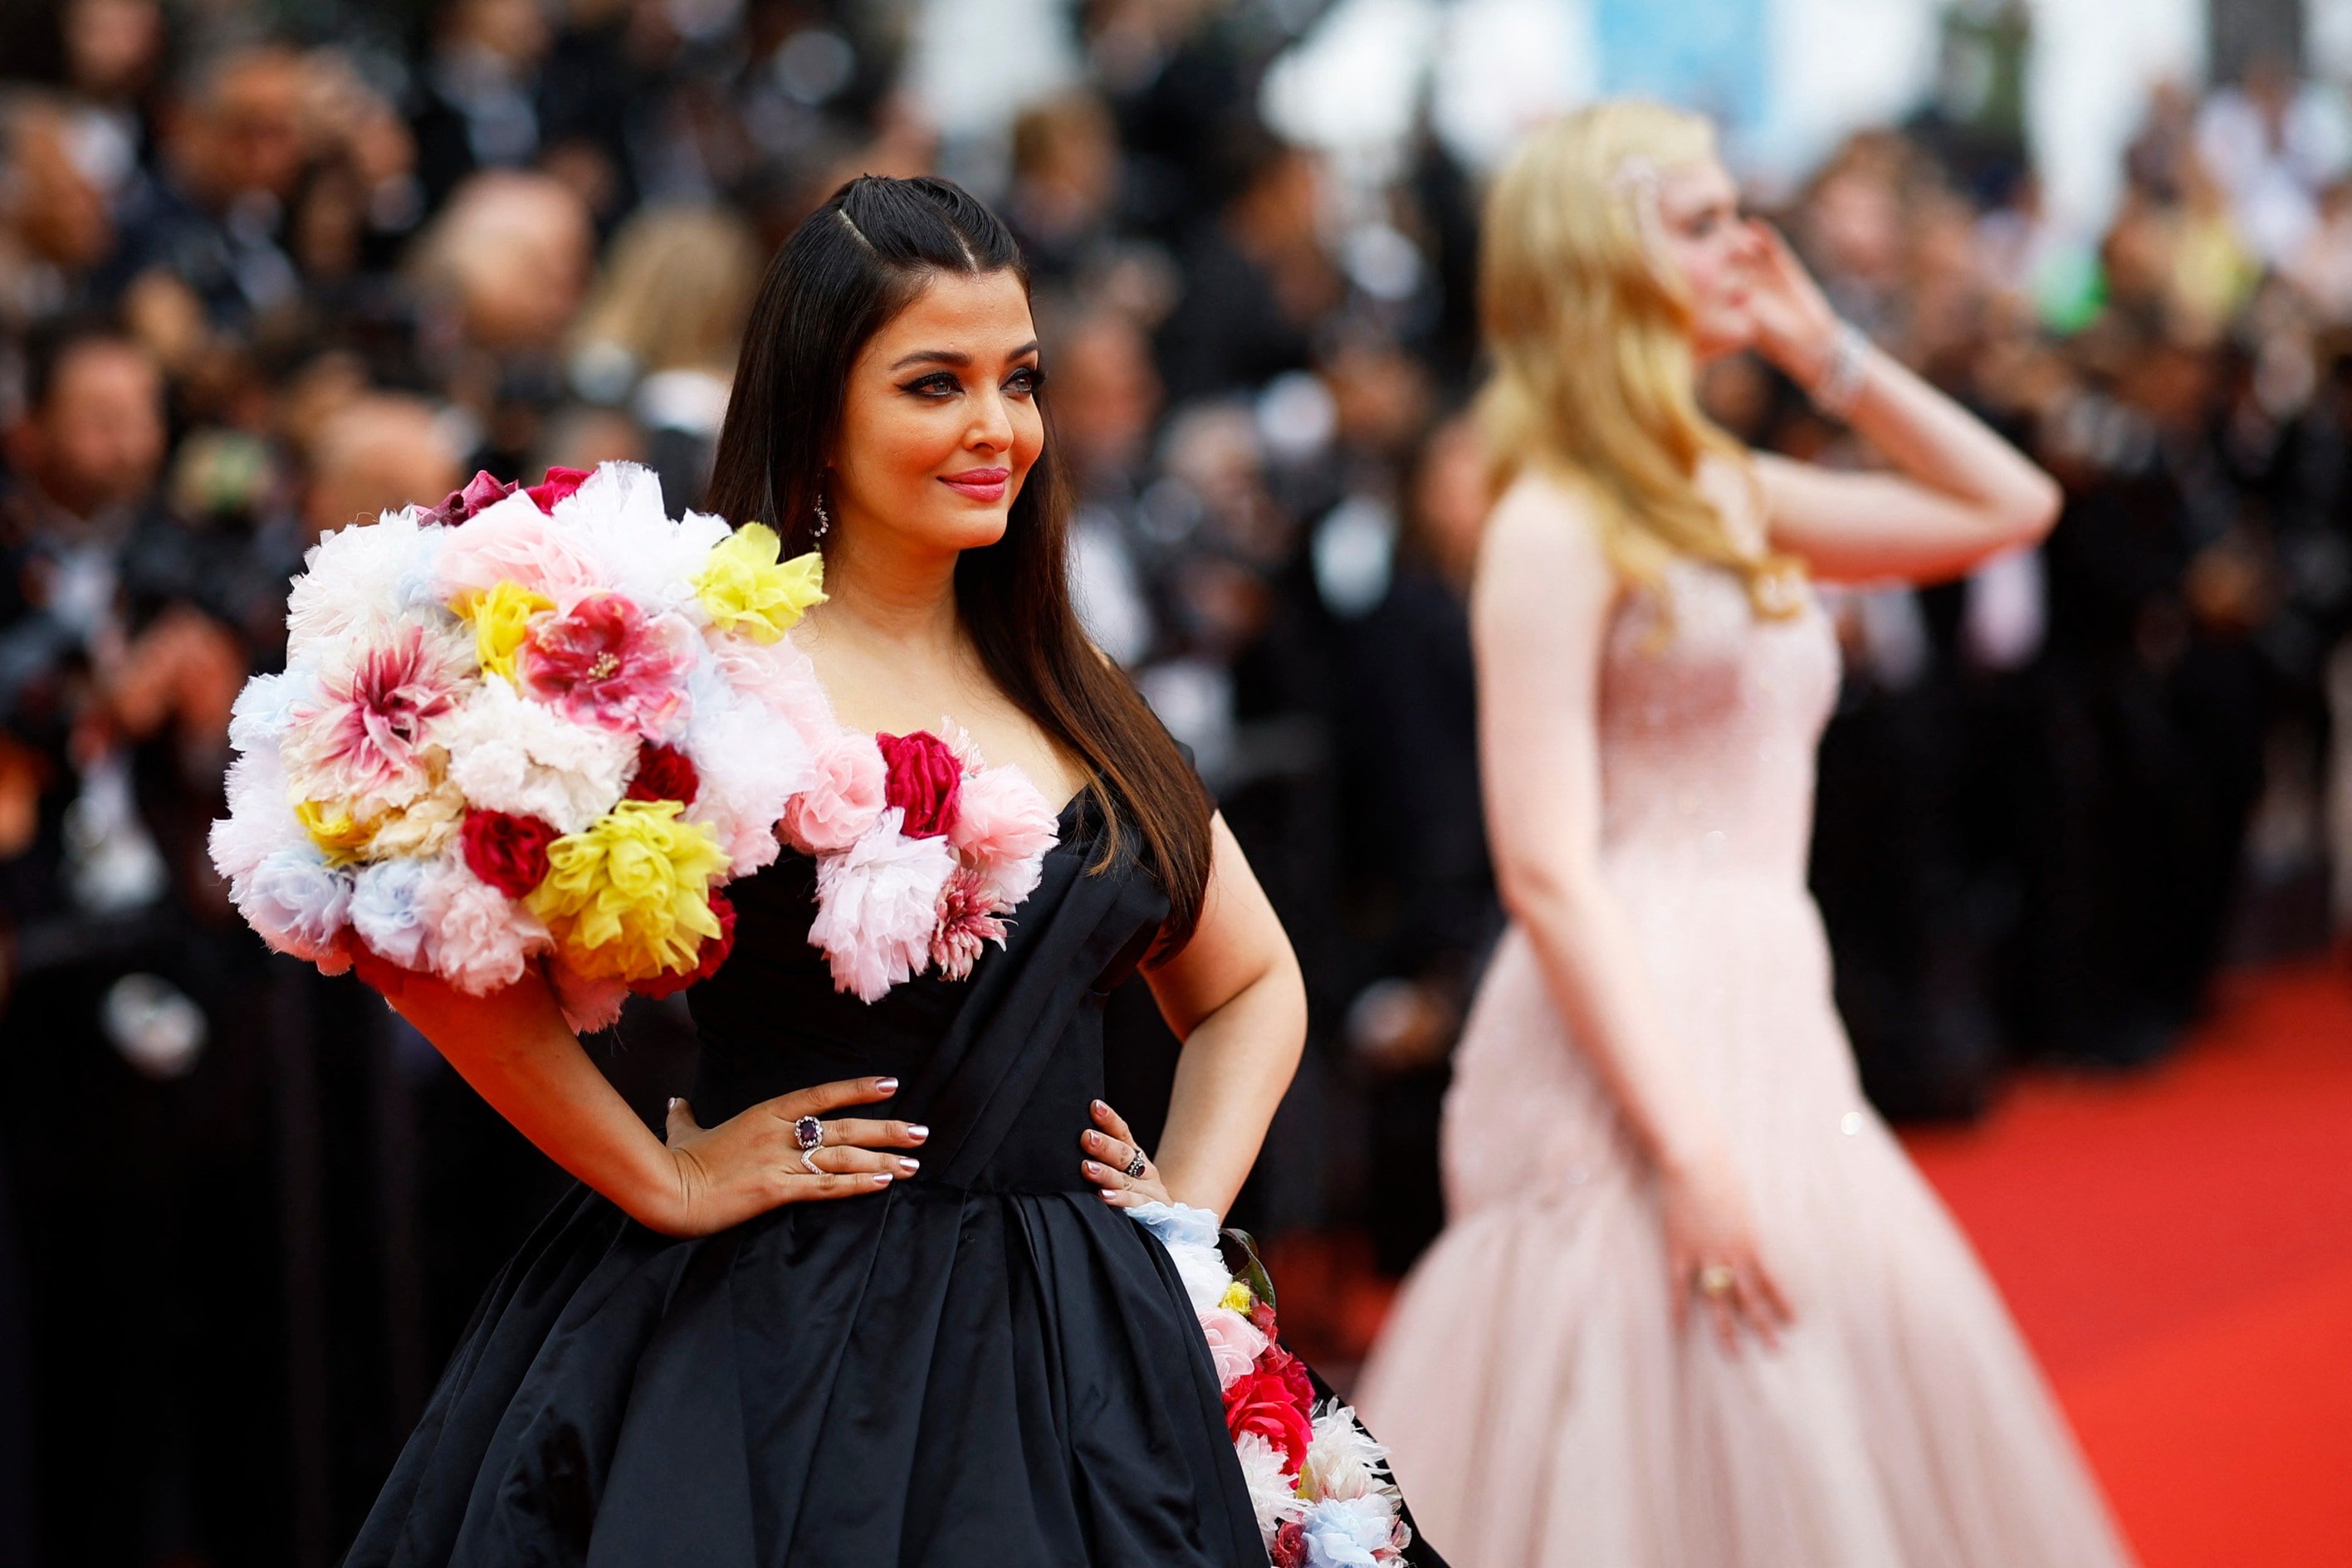 The 75th Cannes Film Festival - Screening of the film "Top Gun: Maverick" Out of Competition - Red Carpet Arrivals - Cannes, France, May 18, 2022. Aishwarya Rai poses. REUTERS/Stephane Mahe(REUTERS)